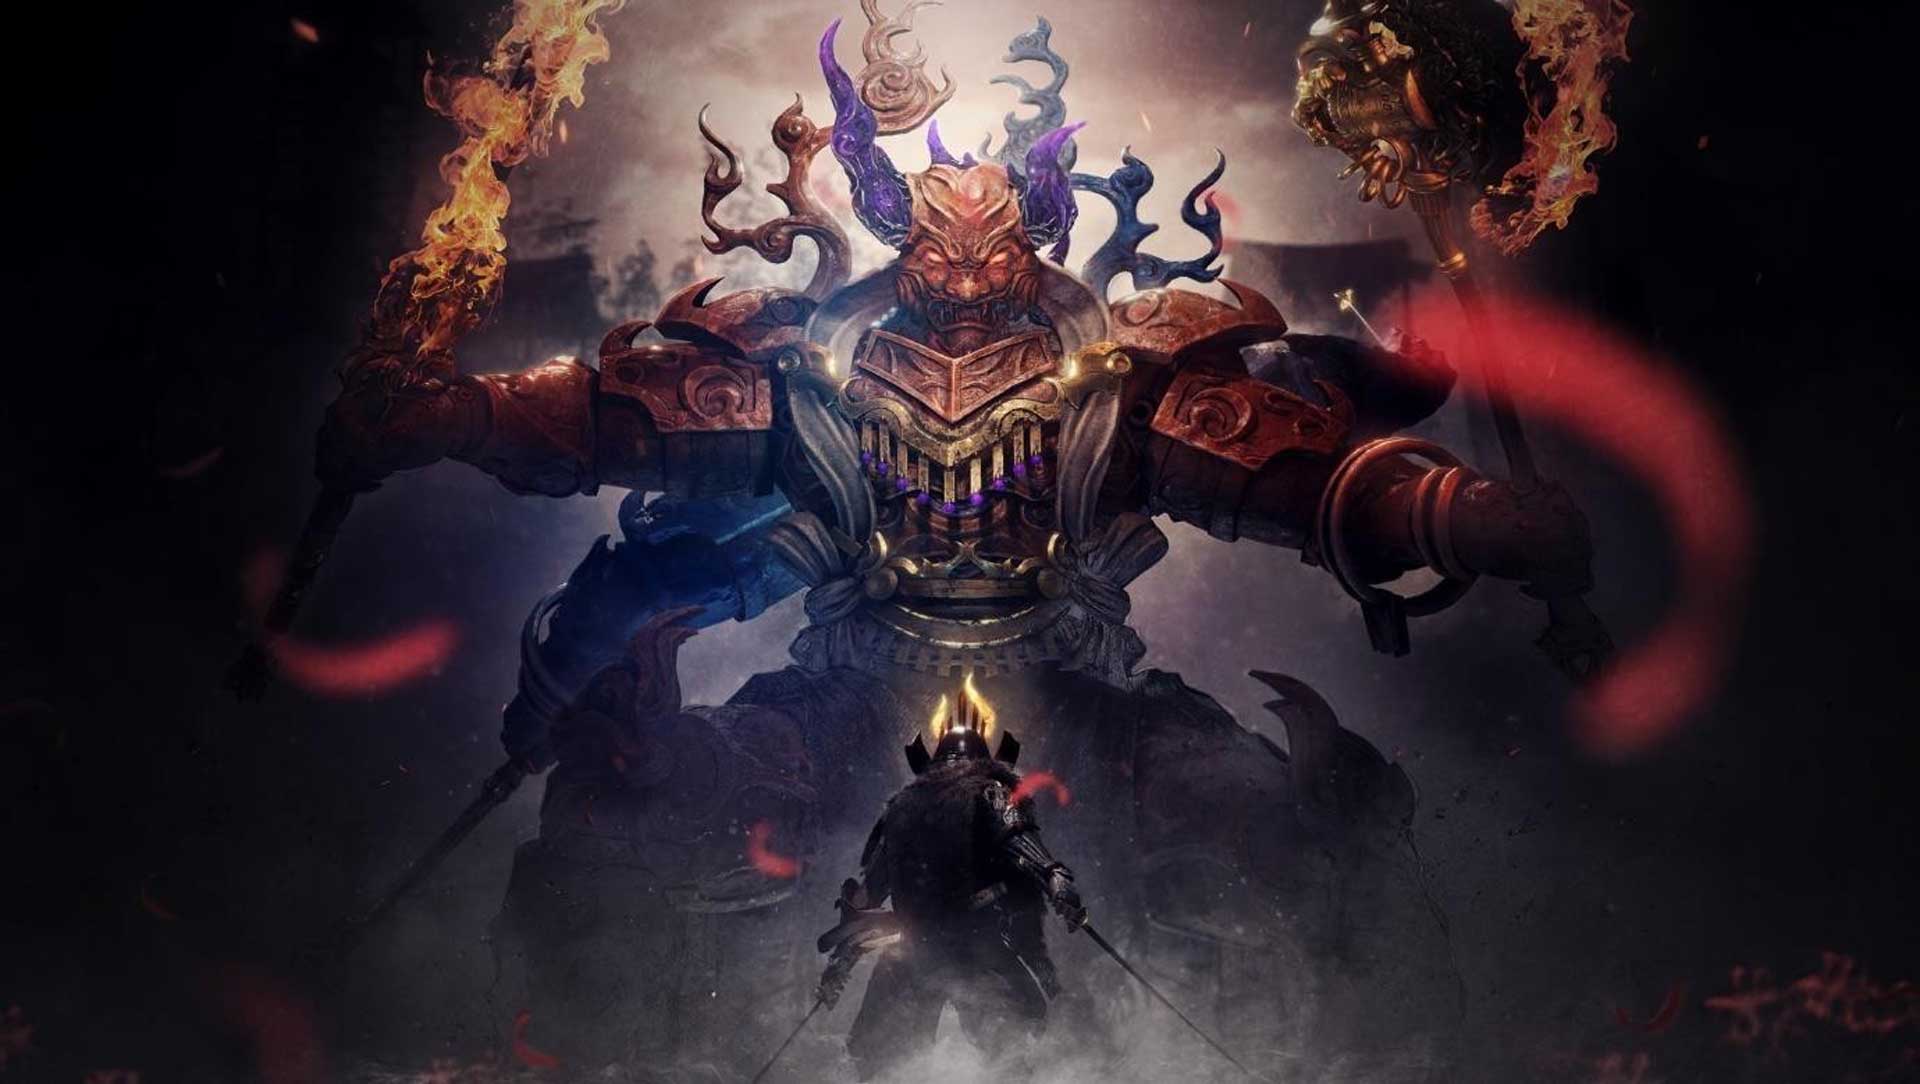 Nioh 2 Was Good But Its DLC Perfected The End-Game Formula